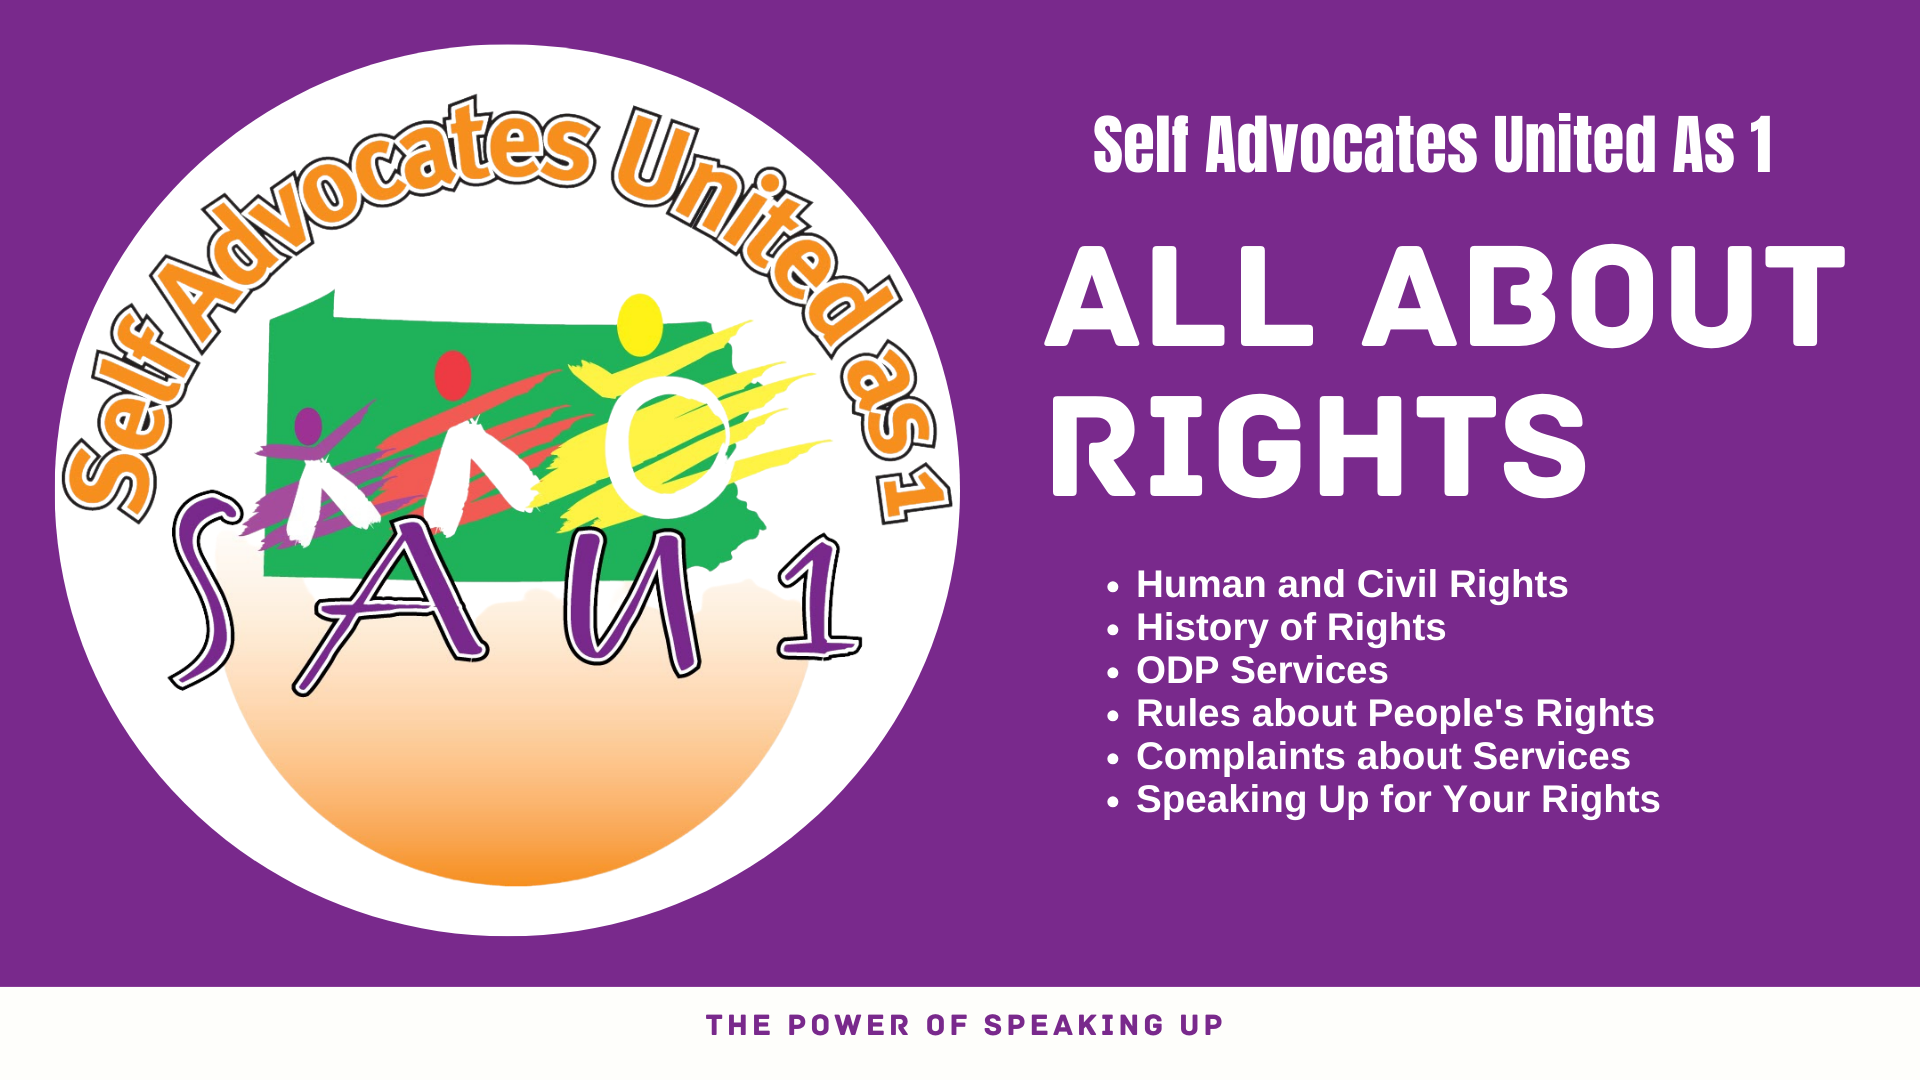 A purple banner with the Self Advocates United as 1 logo on the left and white text on the right. Text reads  Self Advocates United As 1 ALL ABOUT RIGHTS Human and Civil Rights History of Rights  ODP Services Rules about People's Rights Complaints about Services Speaking Up for Your Rights Purple text on a white background at the bottom reads THE POWER OF SPEAKING UP